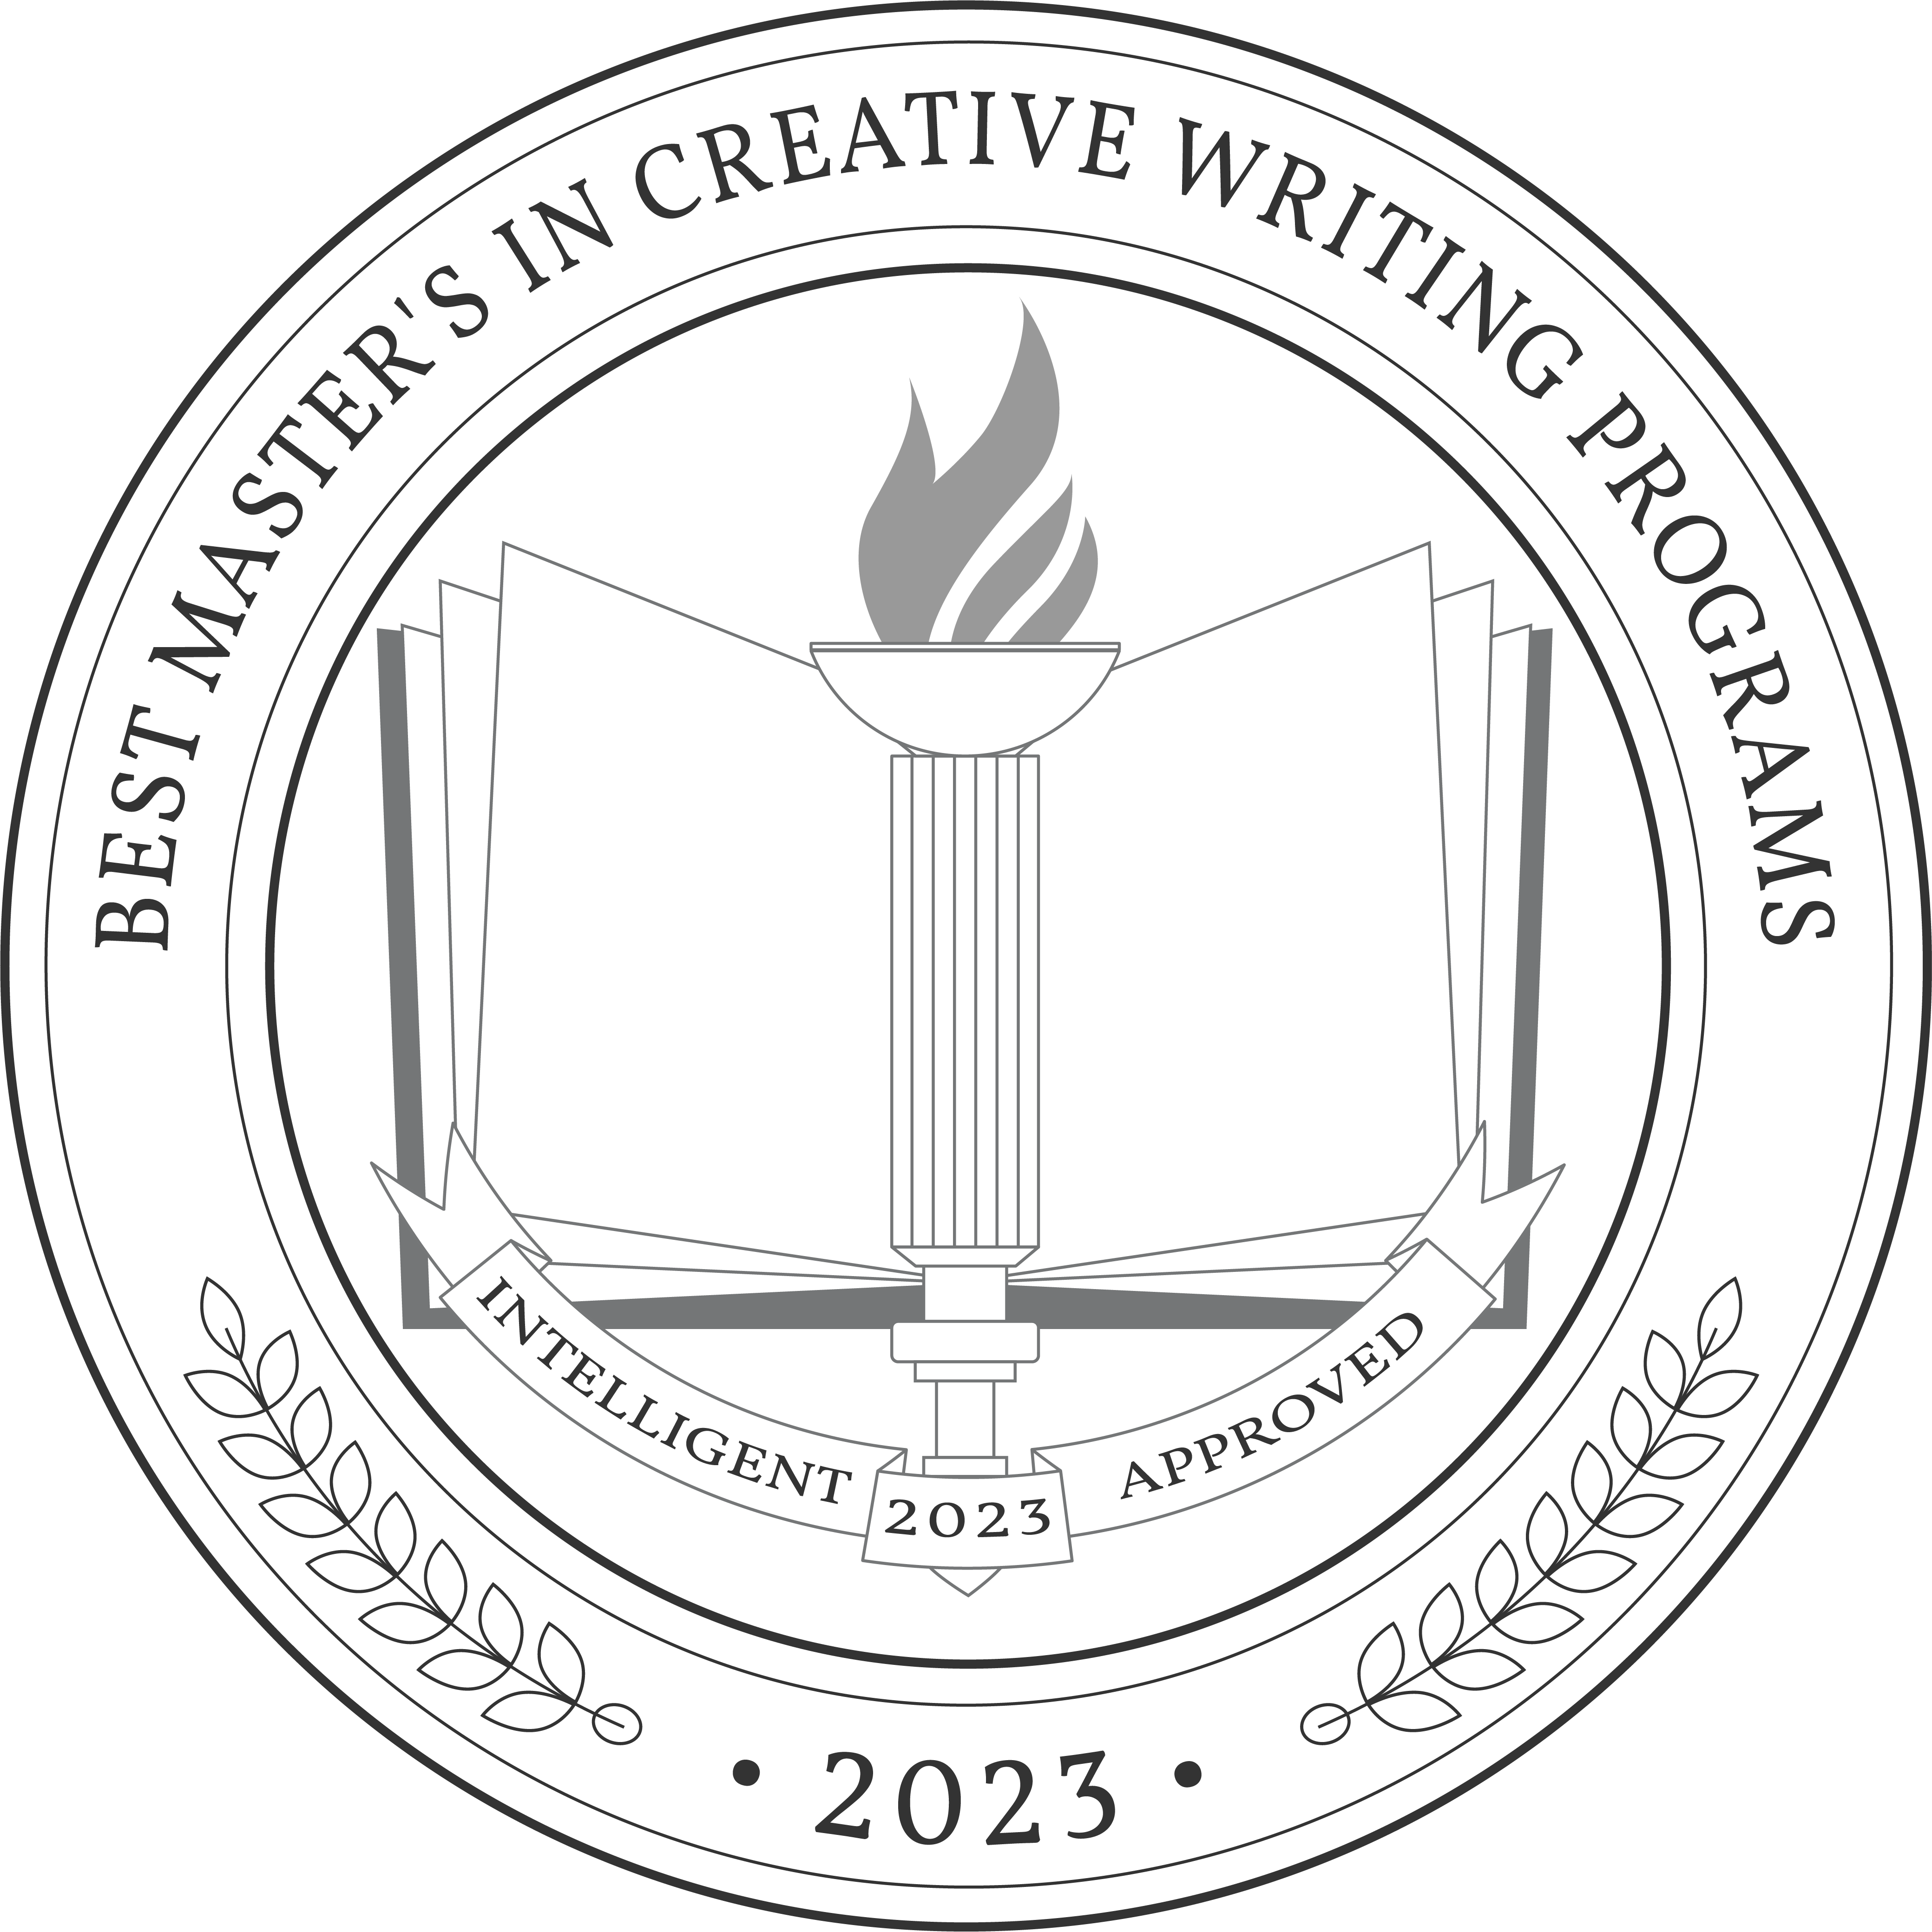 Best Master's in Creative Writing Degree Programs